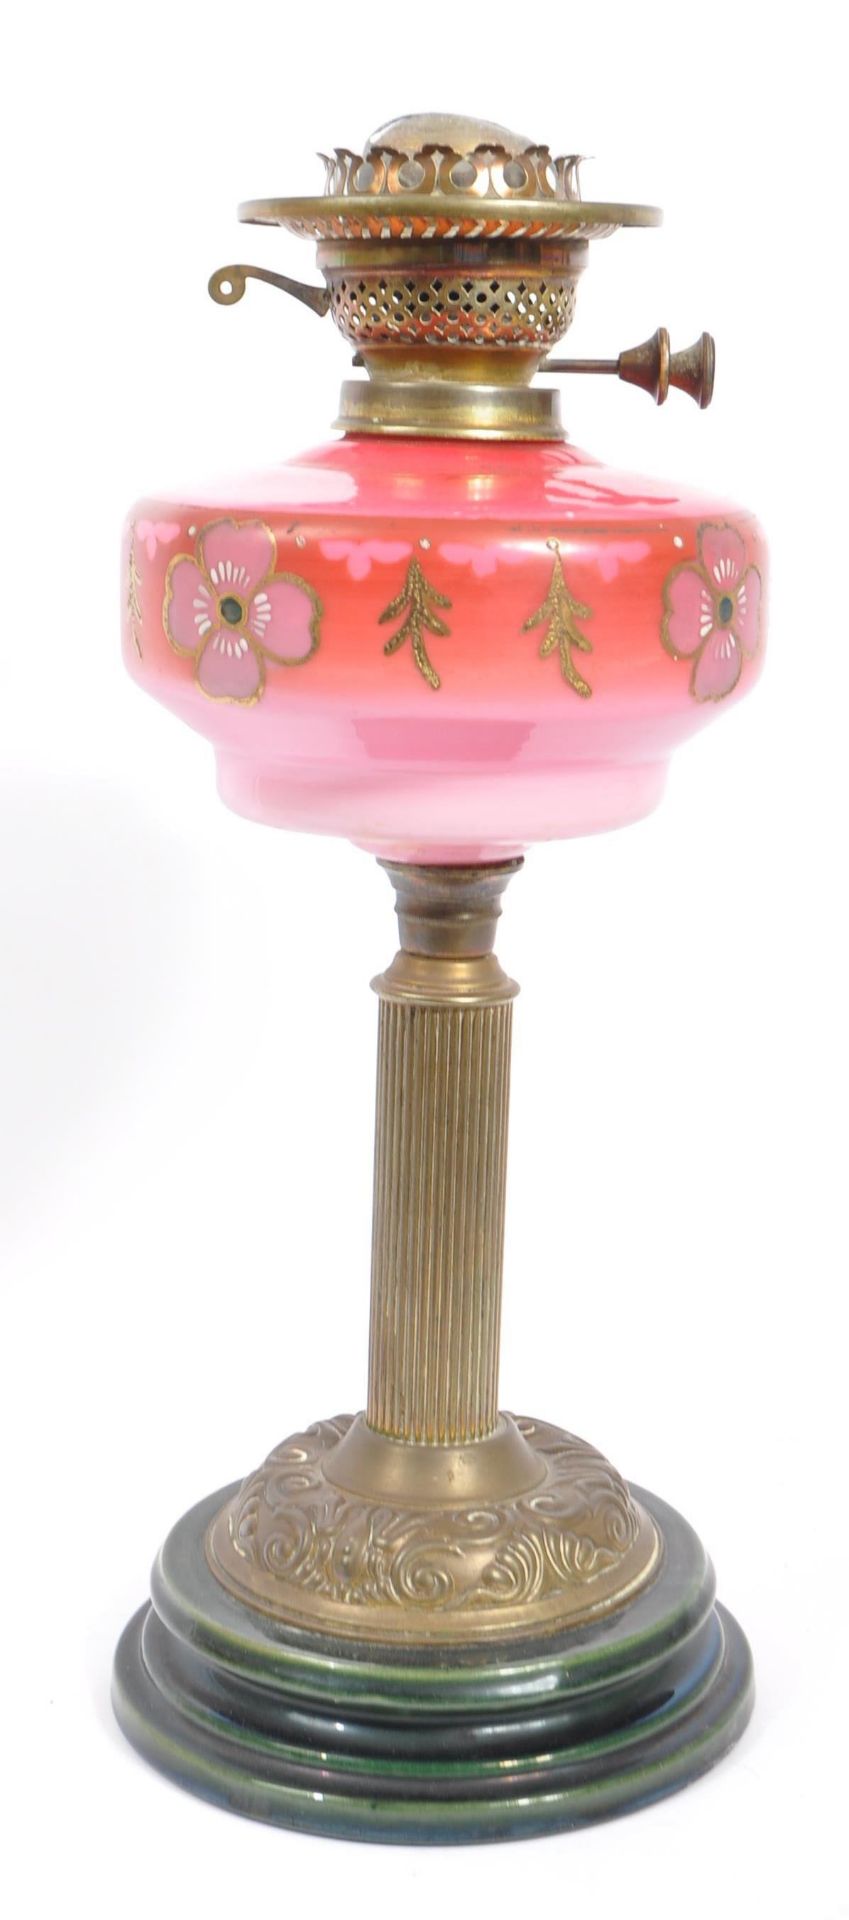 20TH CENTURY PINK OPALINE BRITISH MADE GLASS OIL LAMP BY DUPLEX - Image 3 of 5